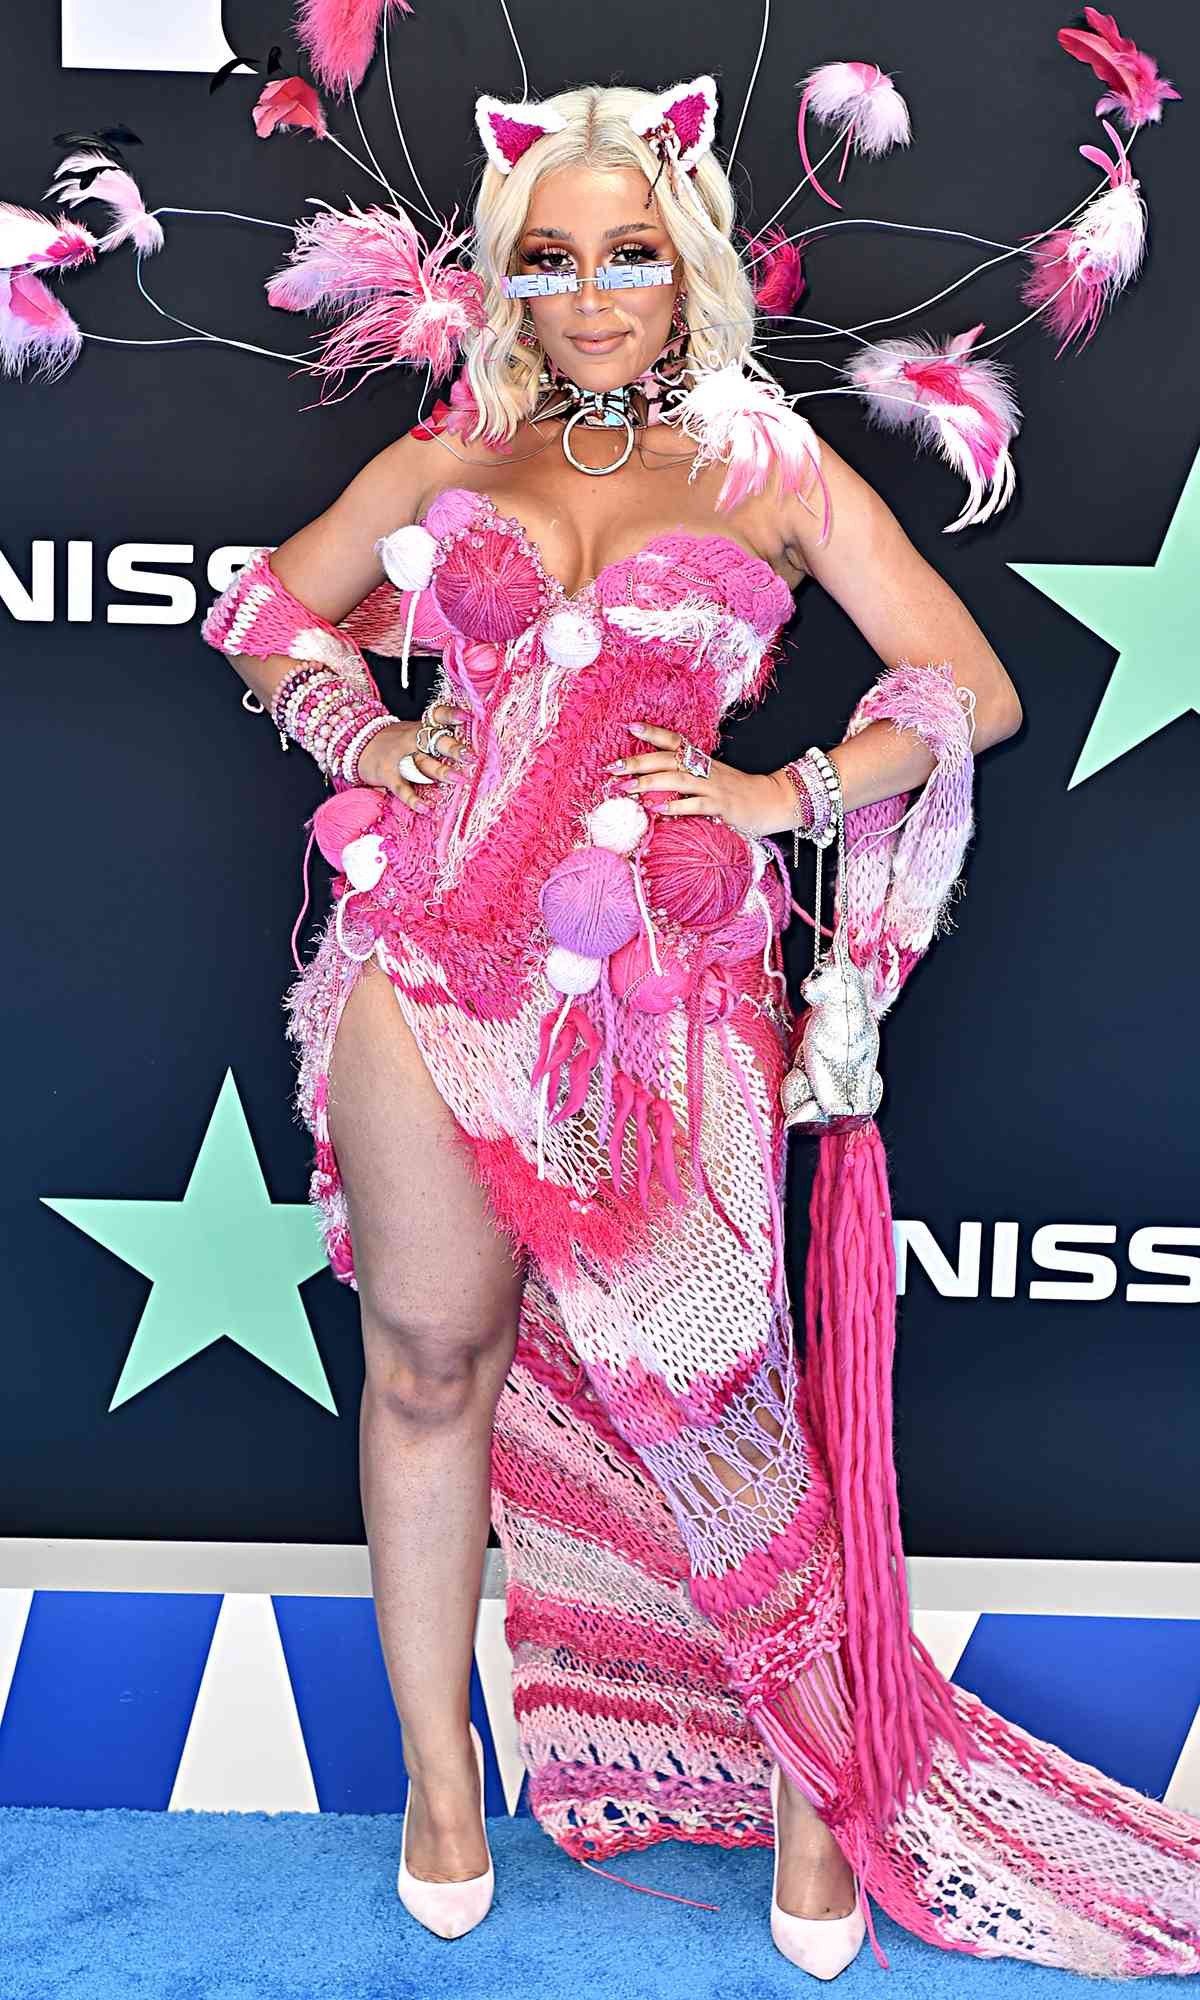 Doja Cat attends the 2019 BET Awards at Microsoft Theater on June 23, 2019 in Los Angeles, California